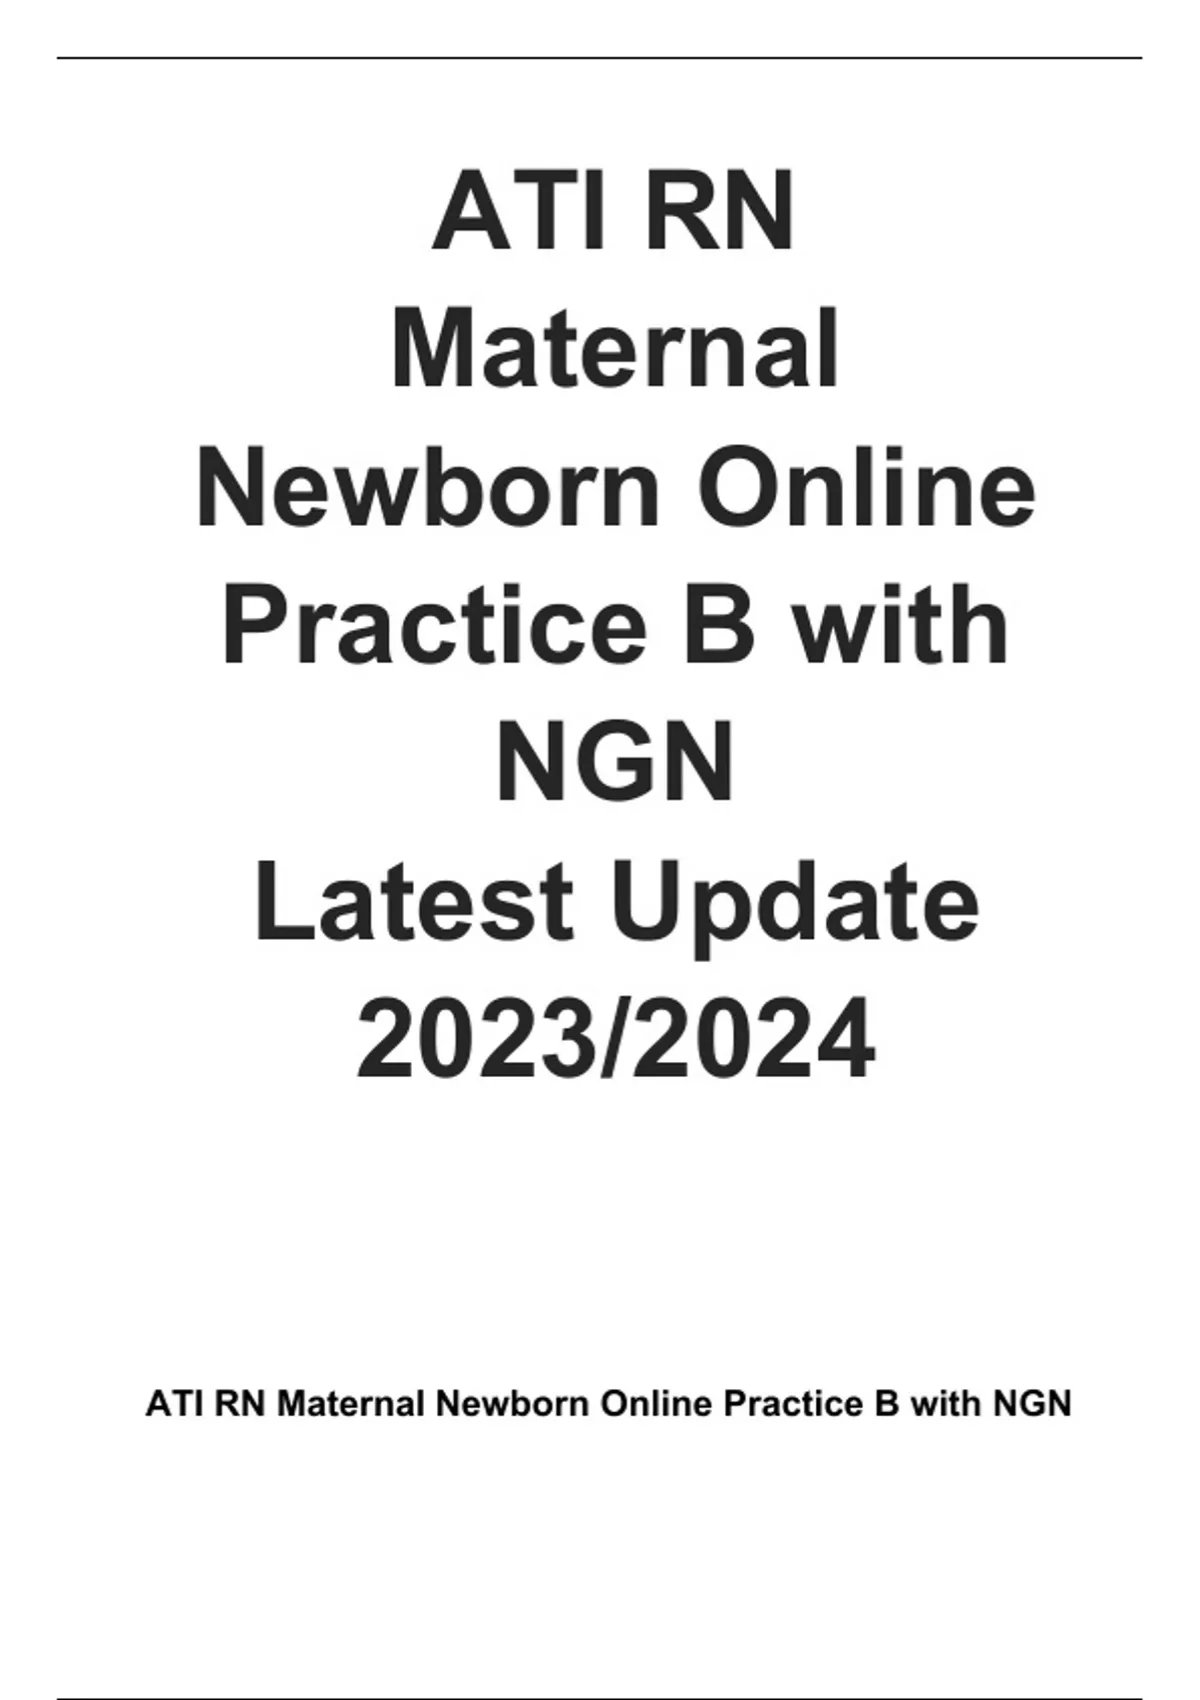 ATI RN Maternal Newborn Online Practice B with NGN Latest Update 2023/